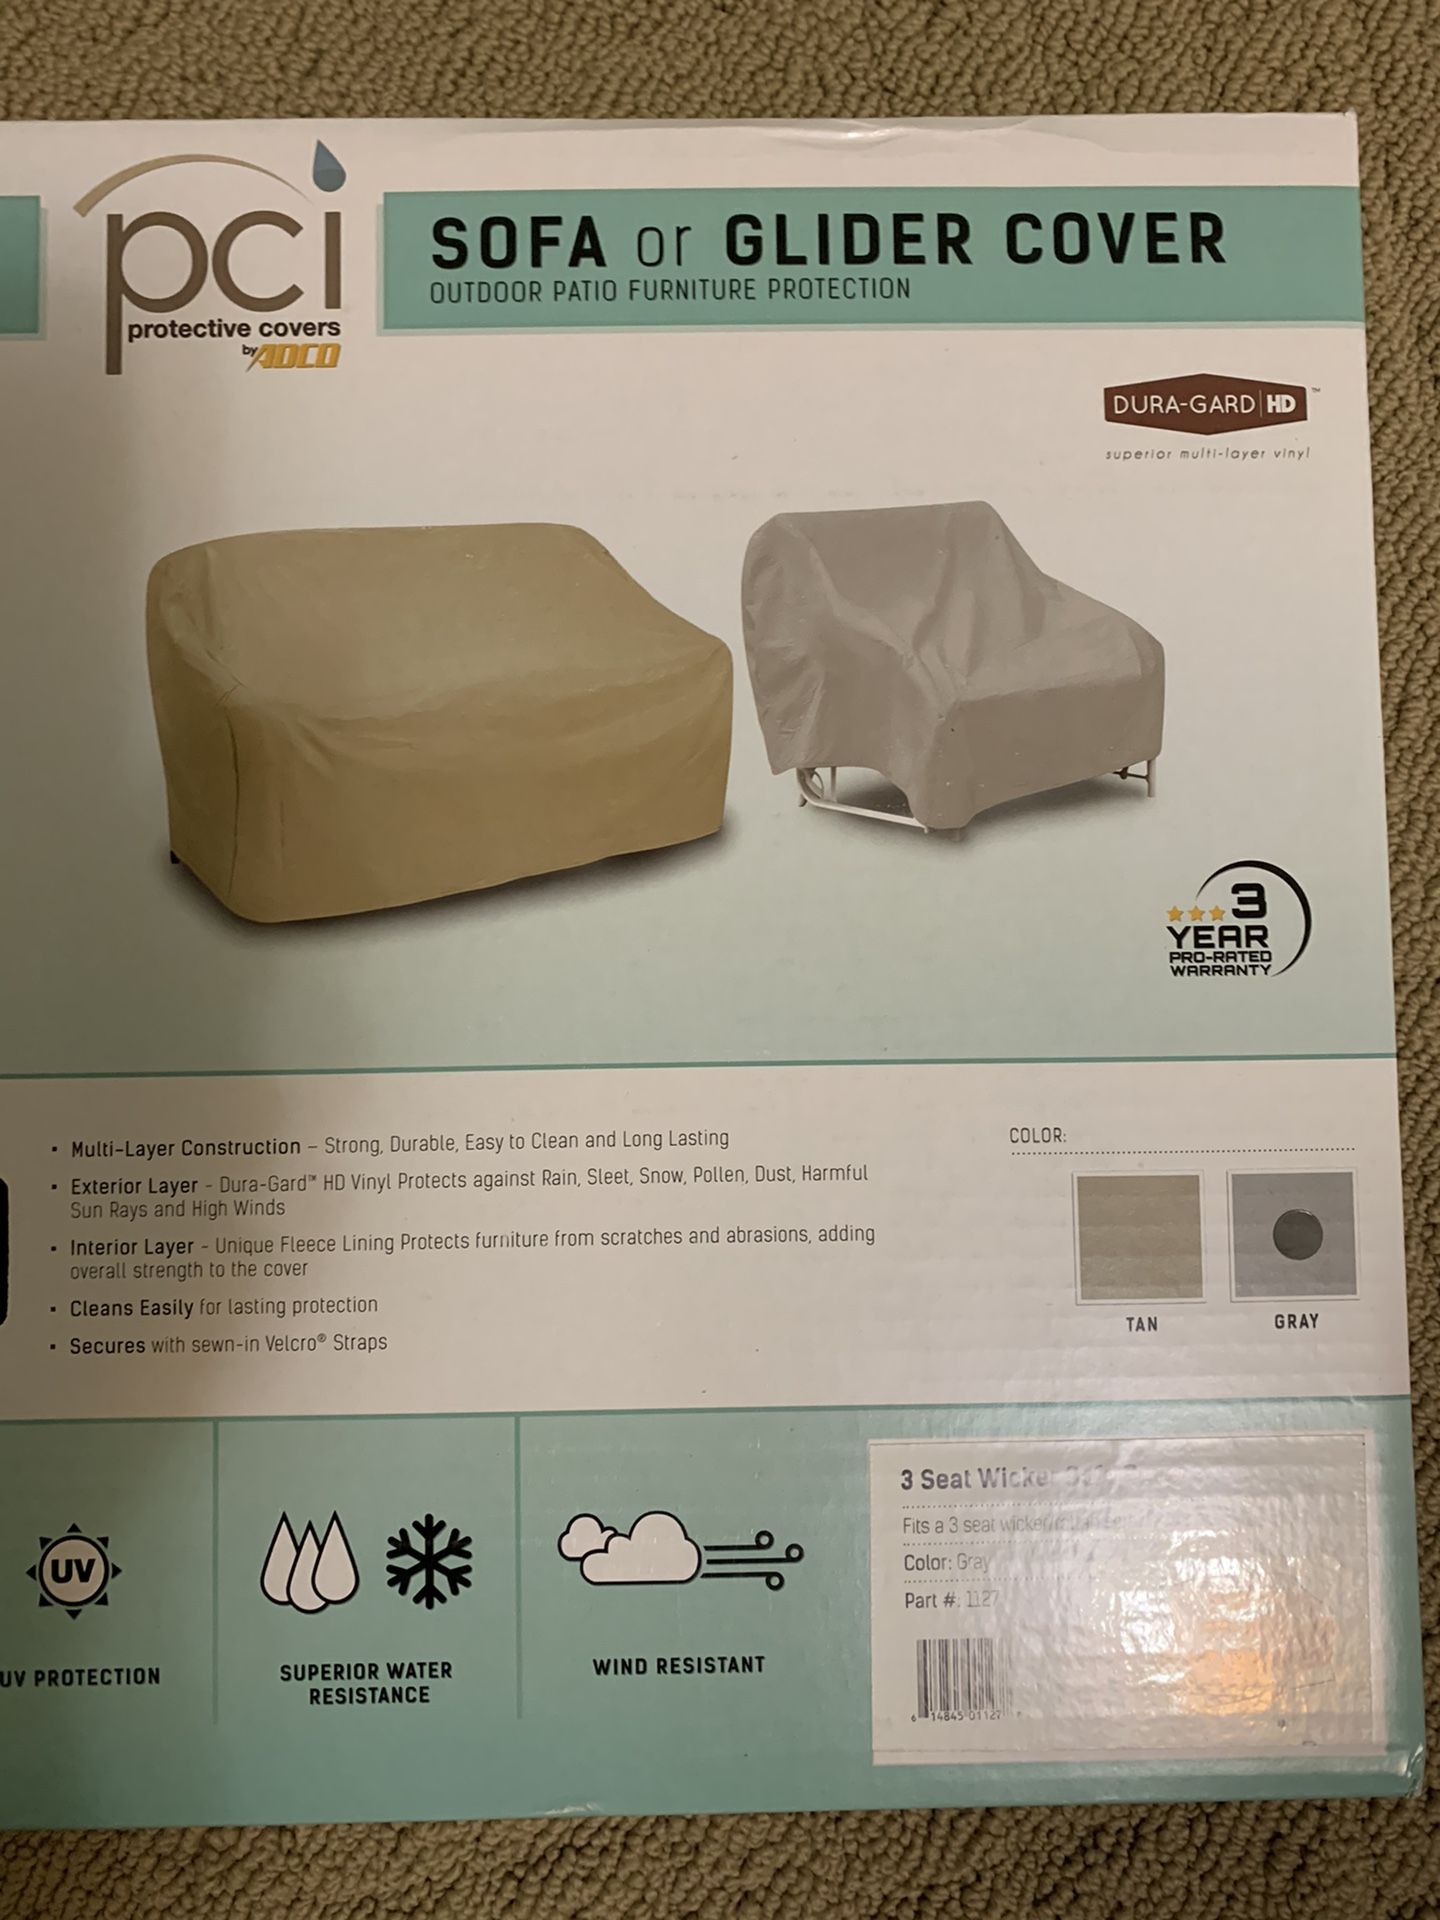 Outdoor Furniture Cover, sofa or glider